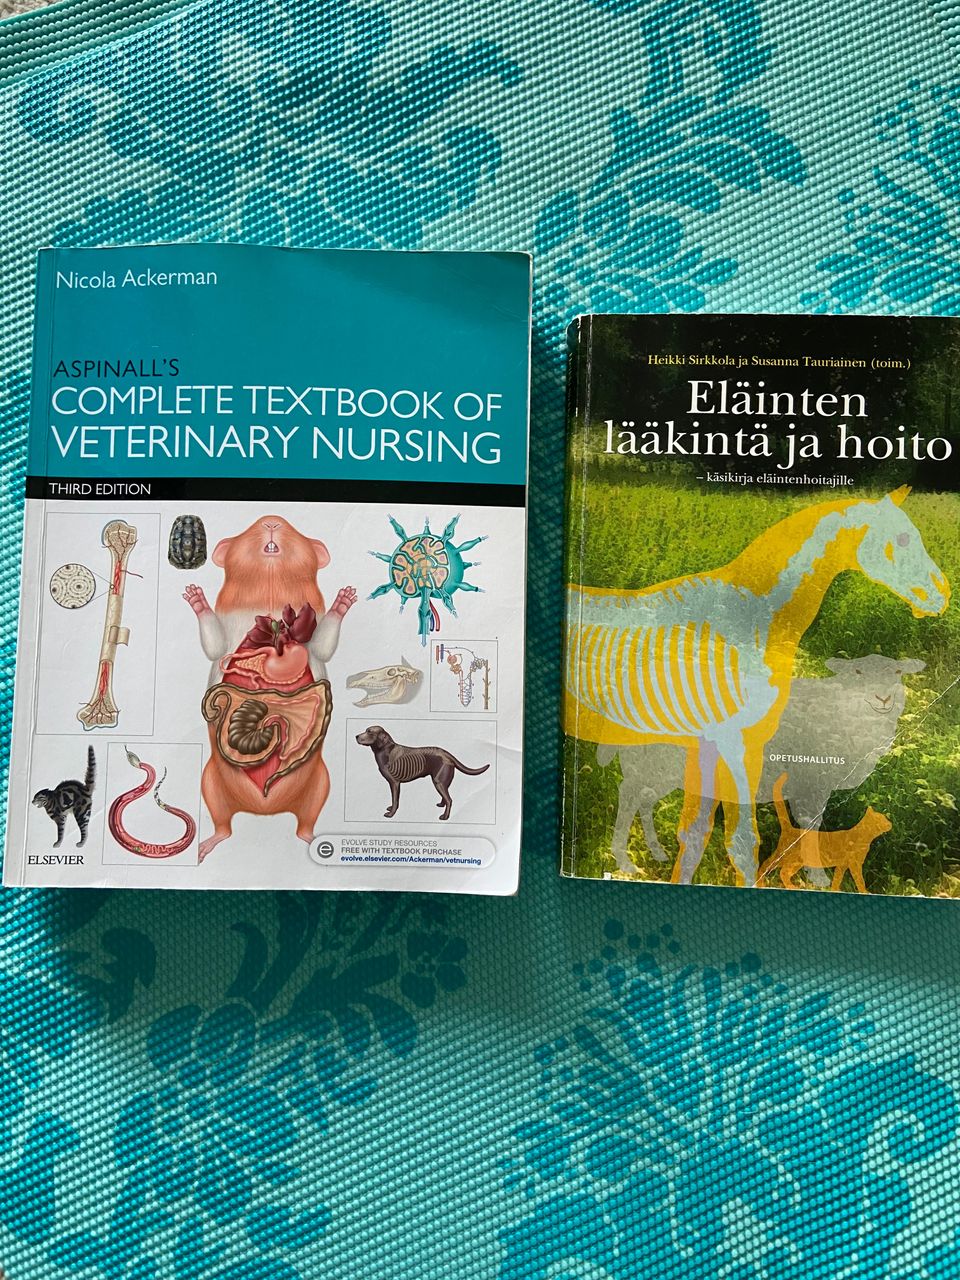 Aspinall’s complete textbook of veterinary nursing